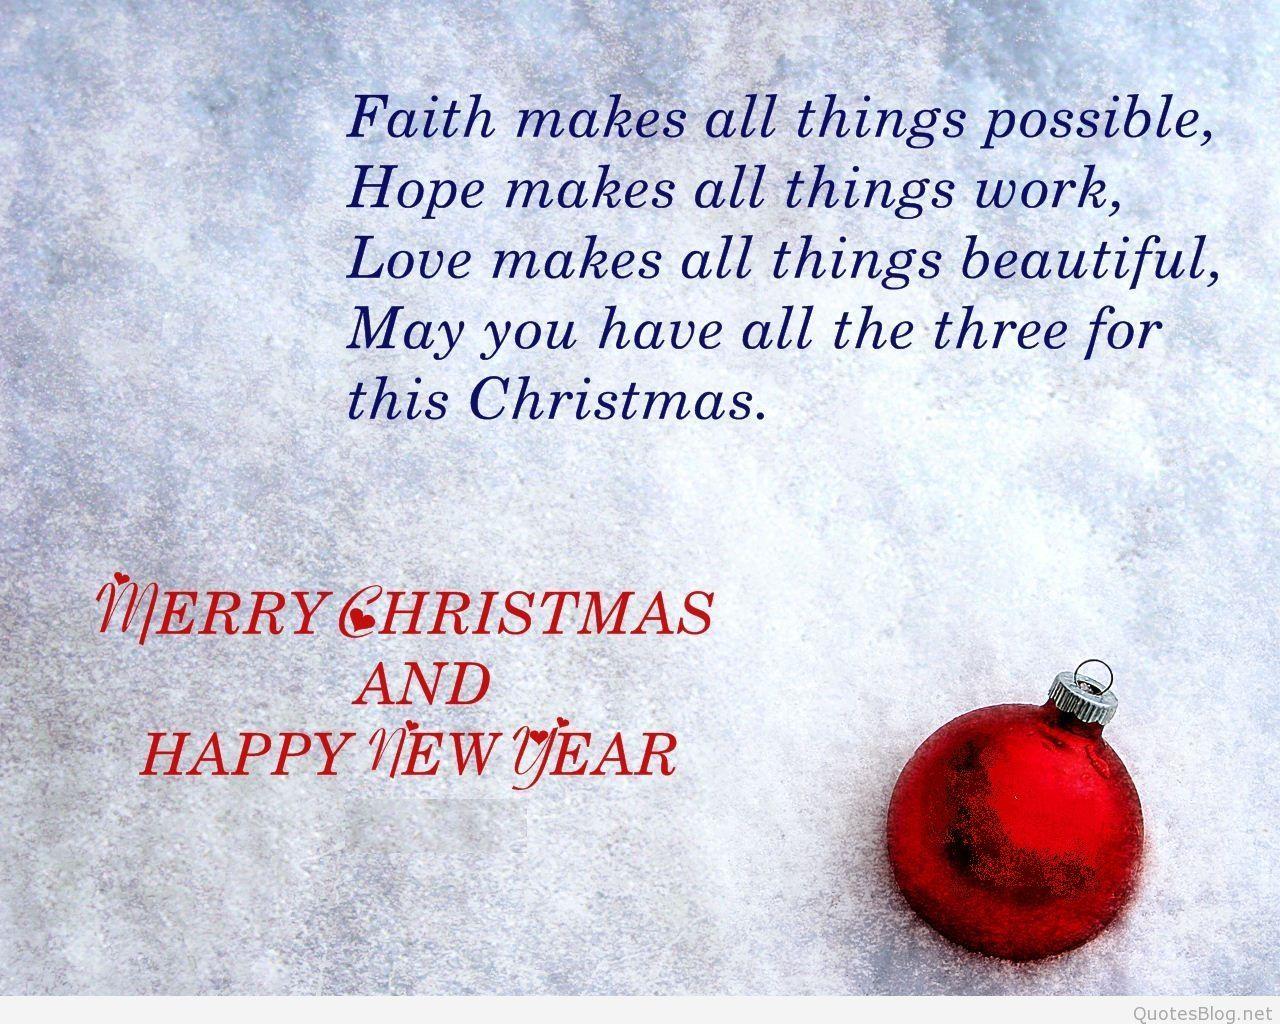 Christmas And Happy New Year Blessing With Authors Image Sayings